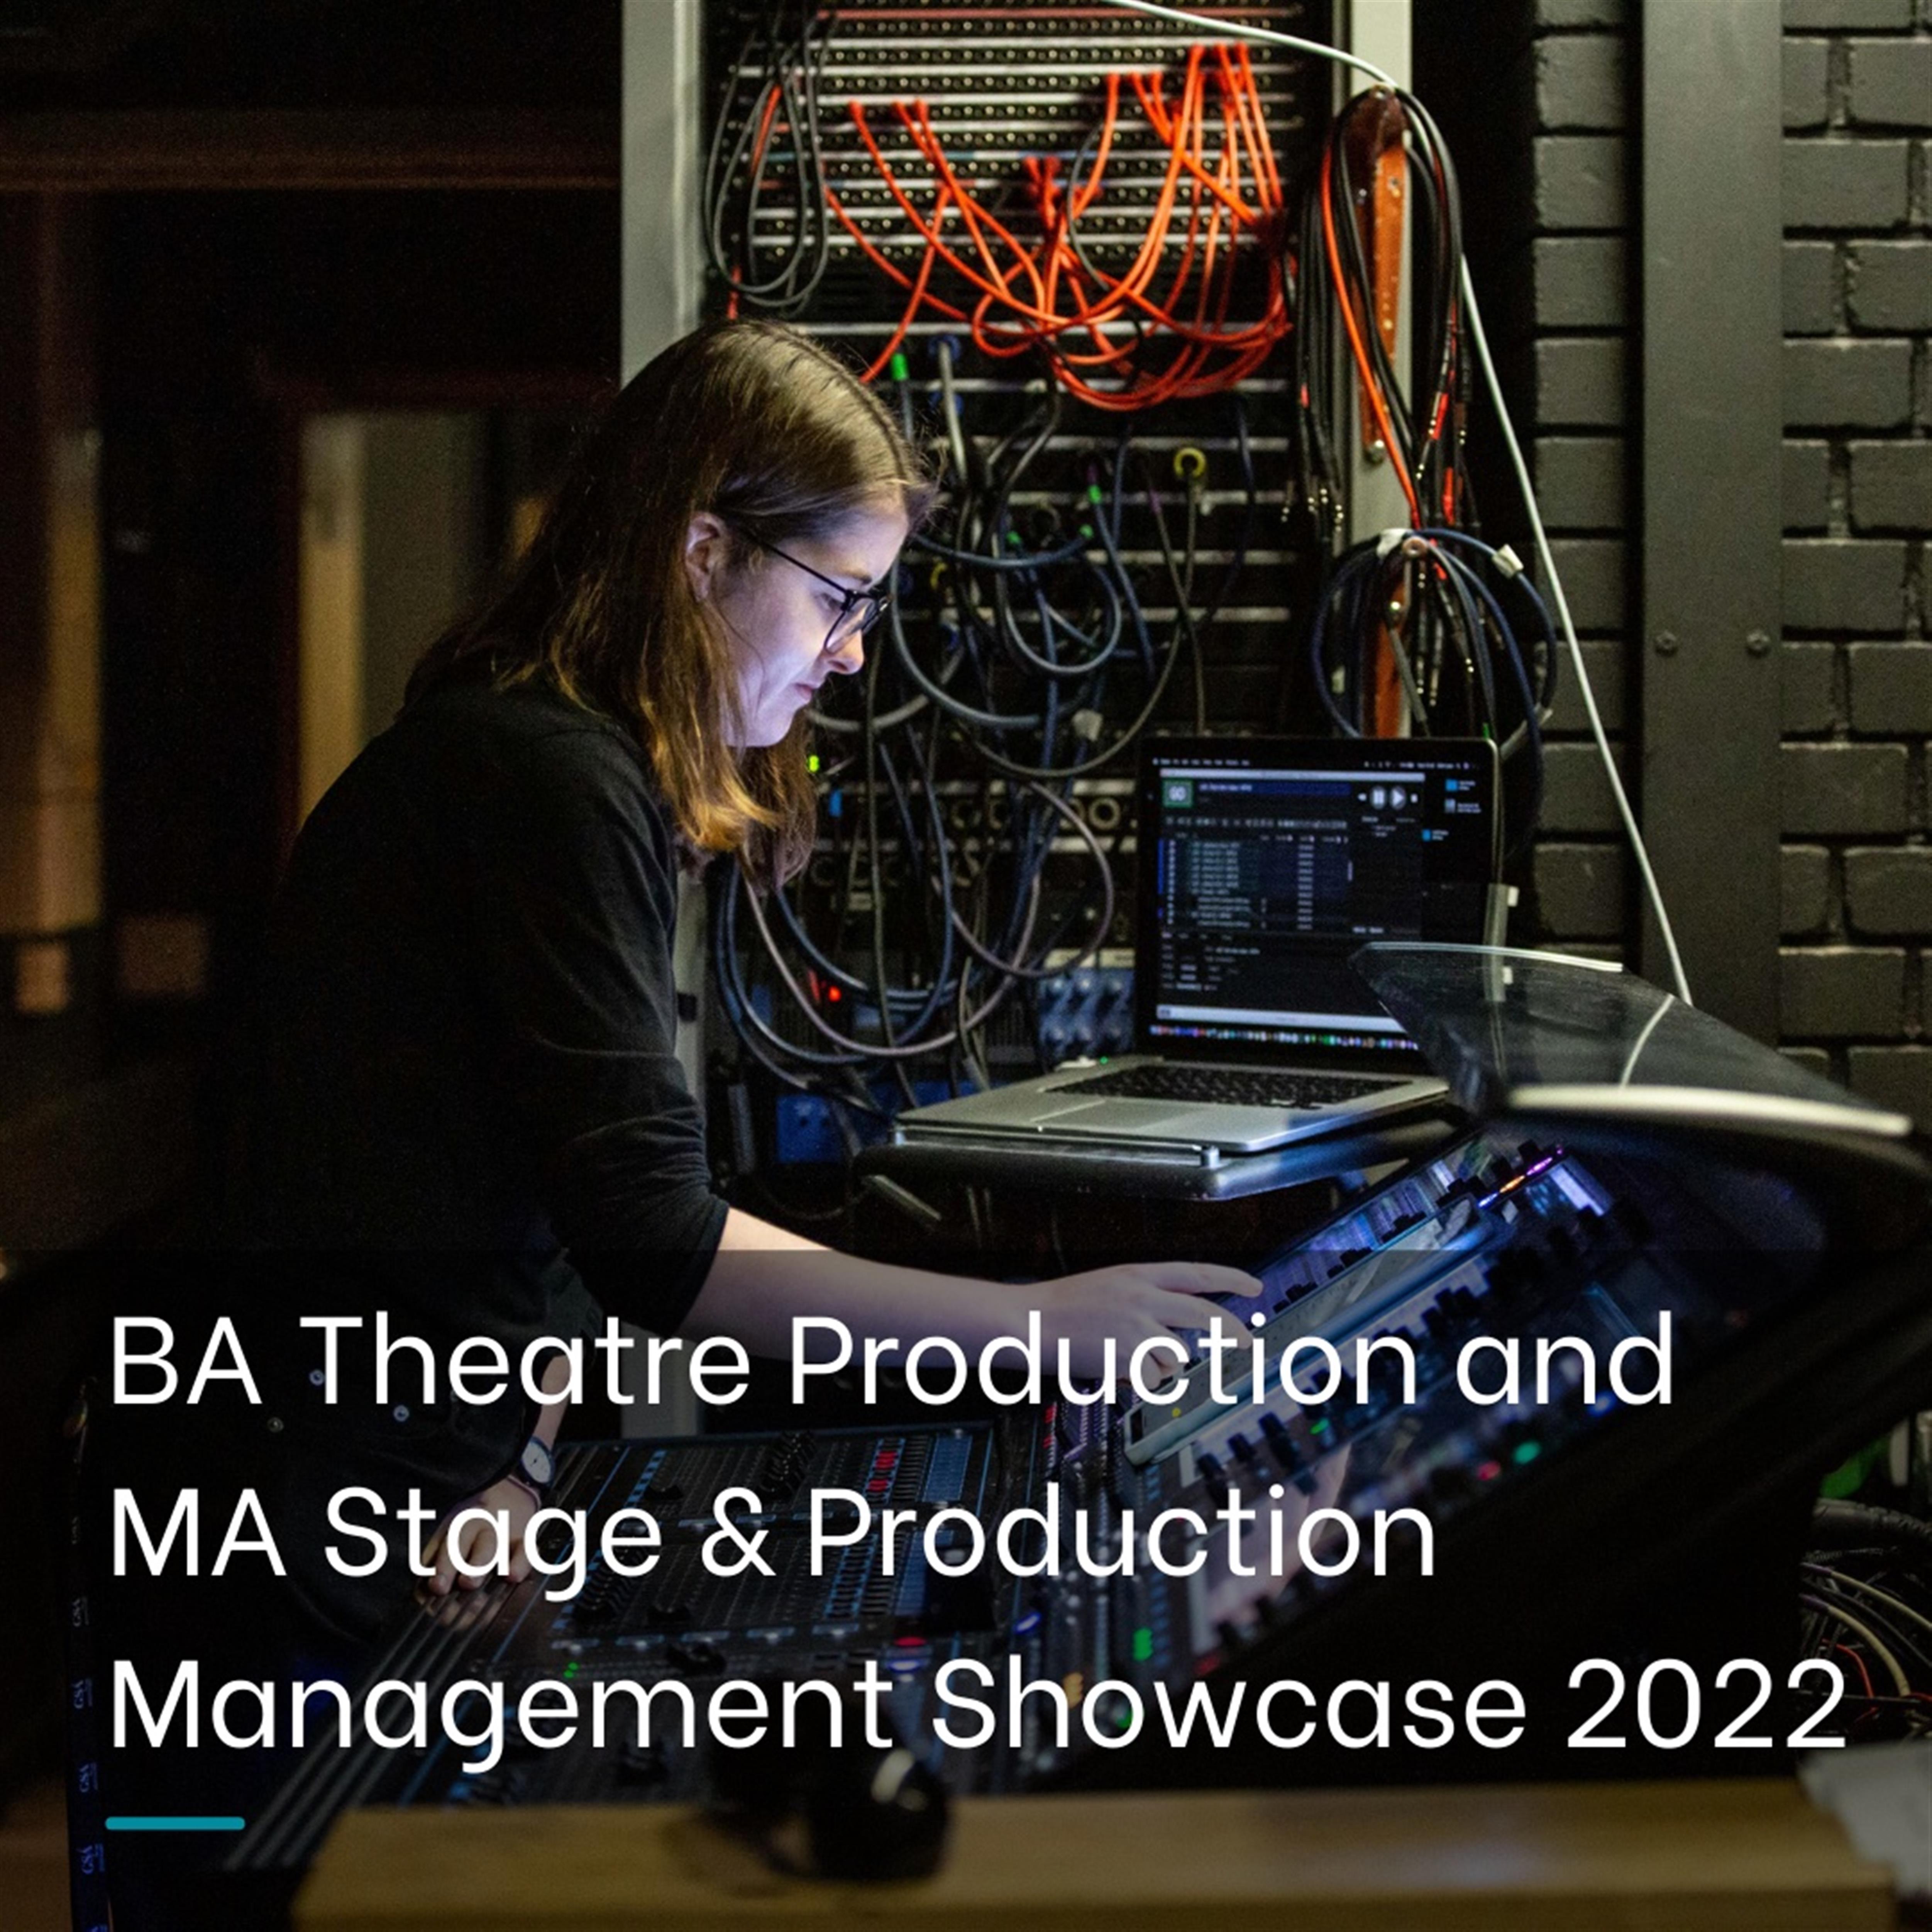 BA Theatre Production and MA Stage & Production Management Showcase 2022 